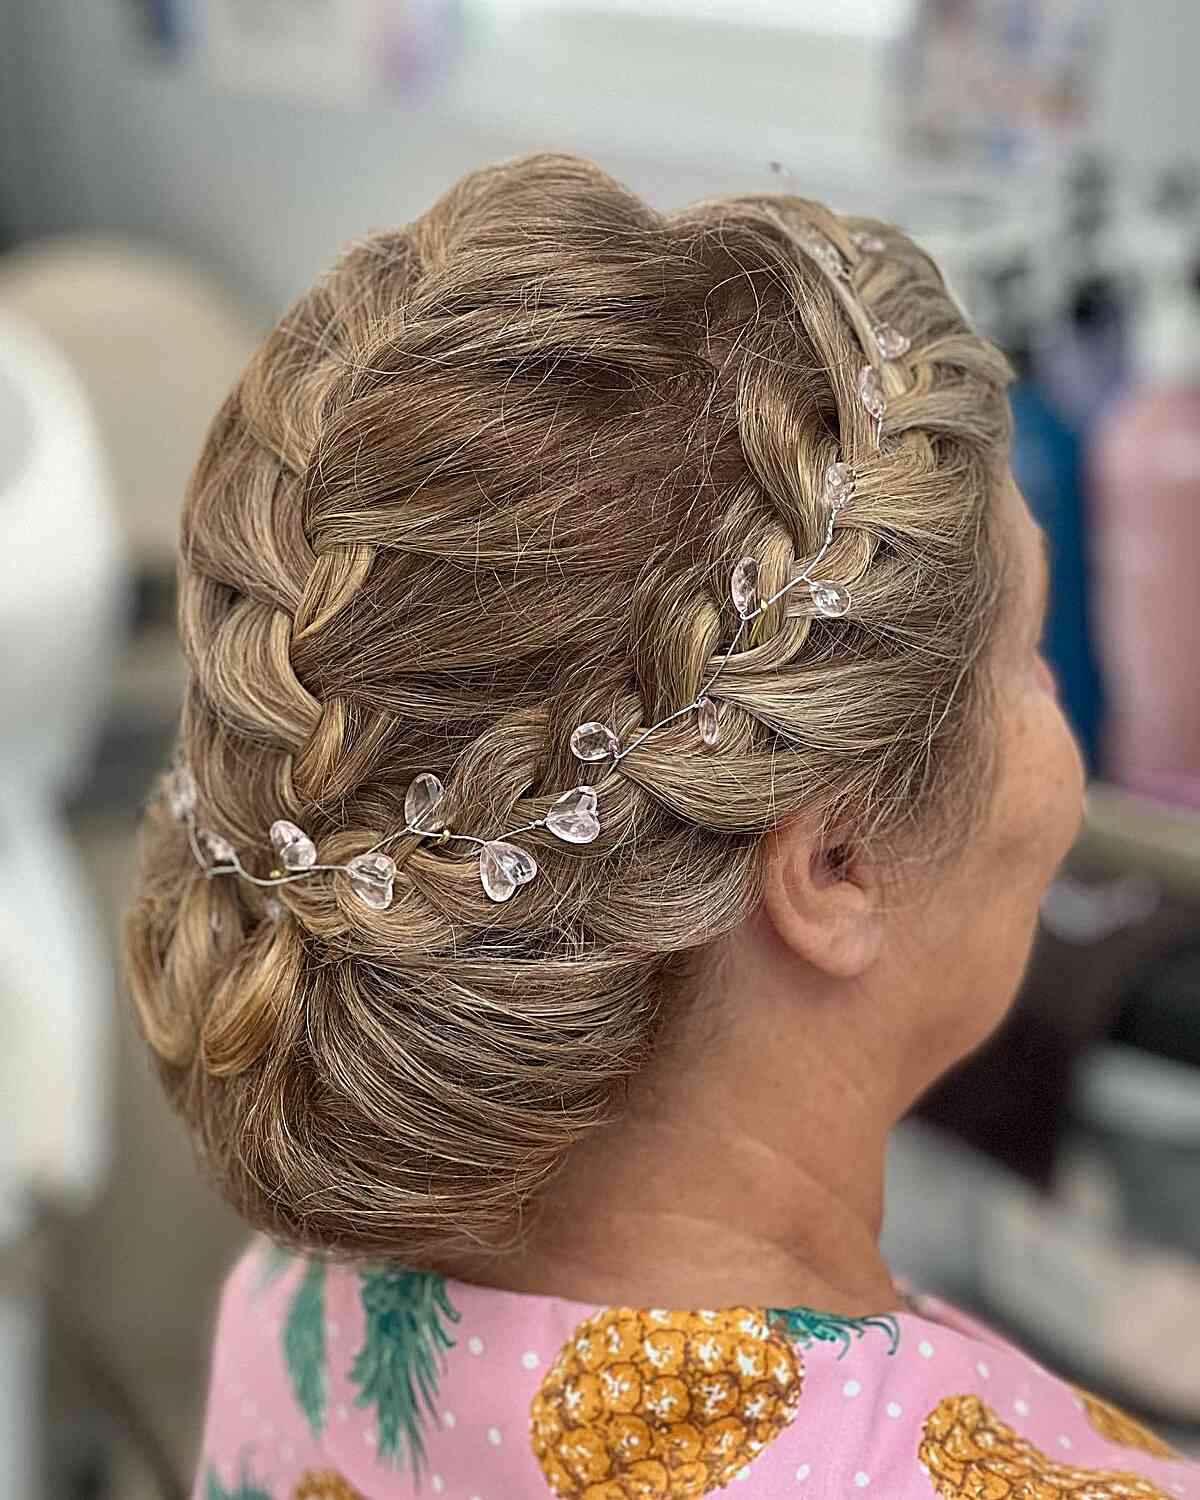 Accessorized Braid Updo Wedding Hairstyle for Mothers of the Groom